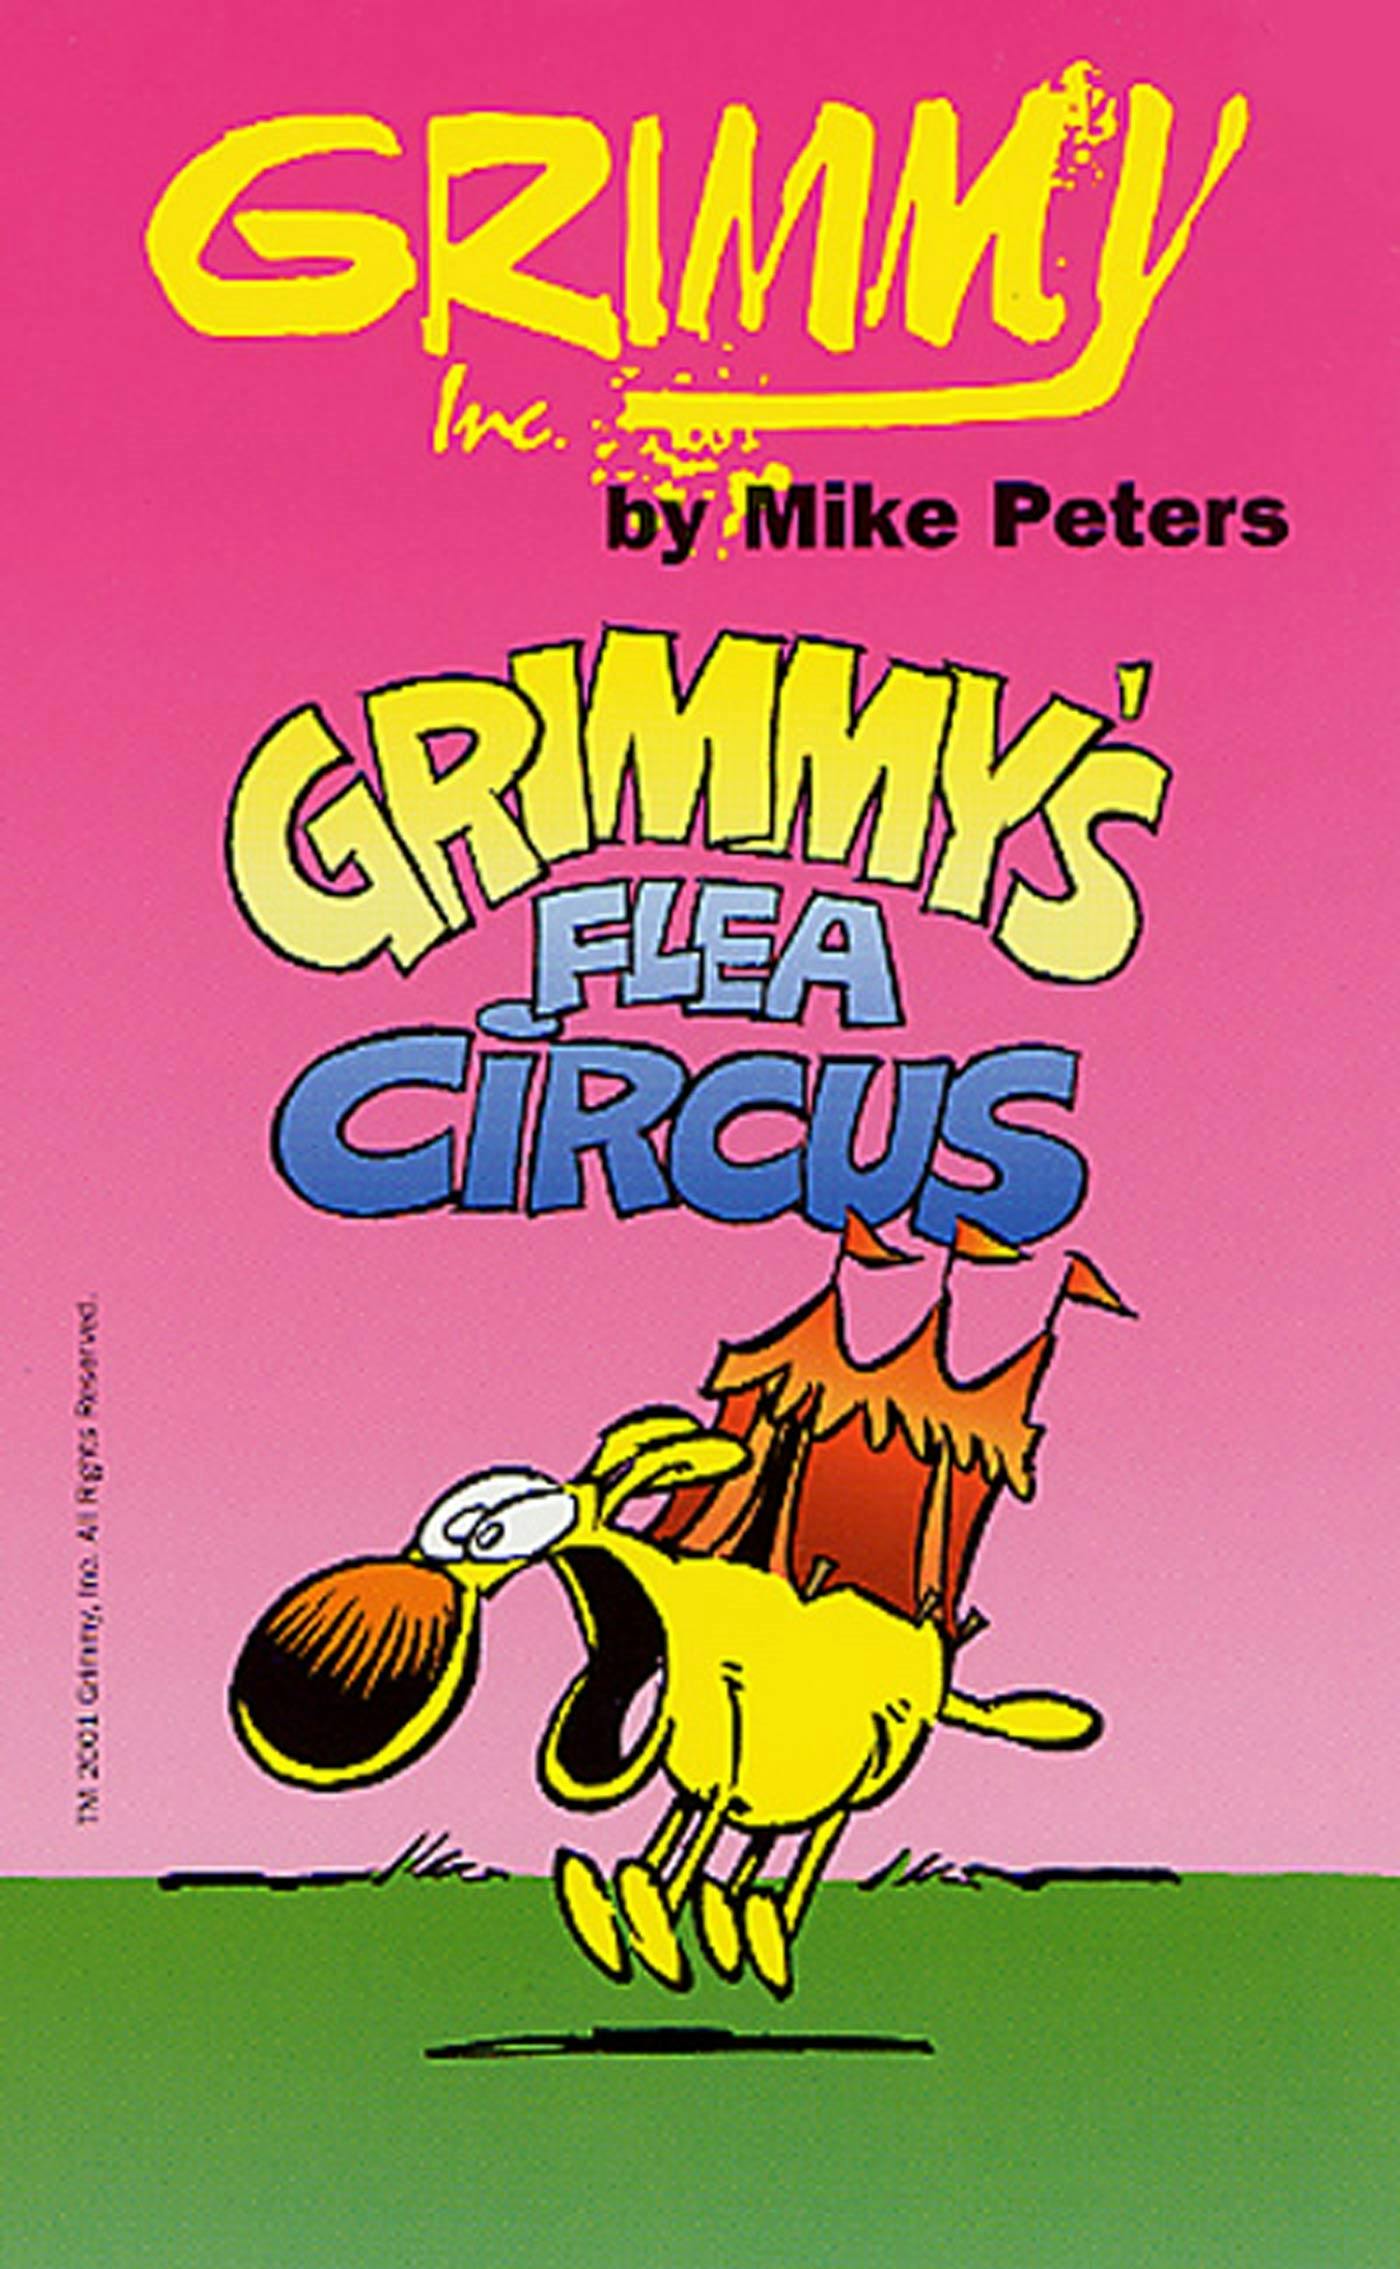 Cover for the book titled as: Grimmy: Grimmy's Flea Circus